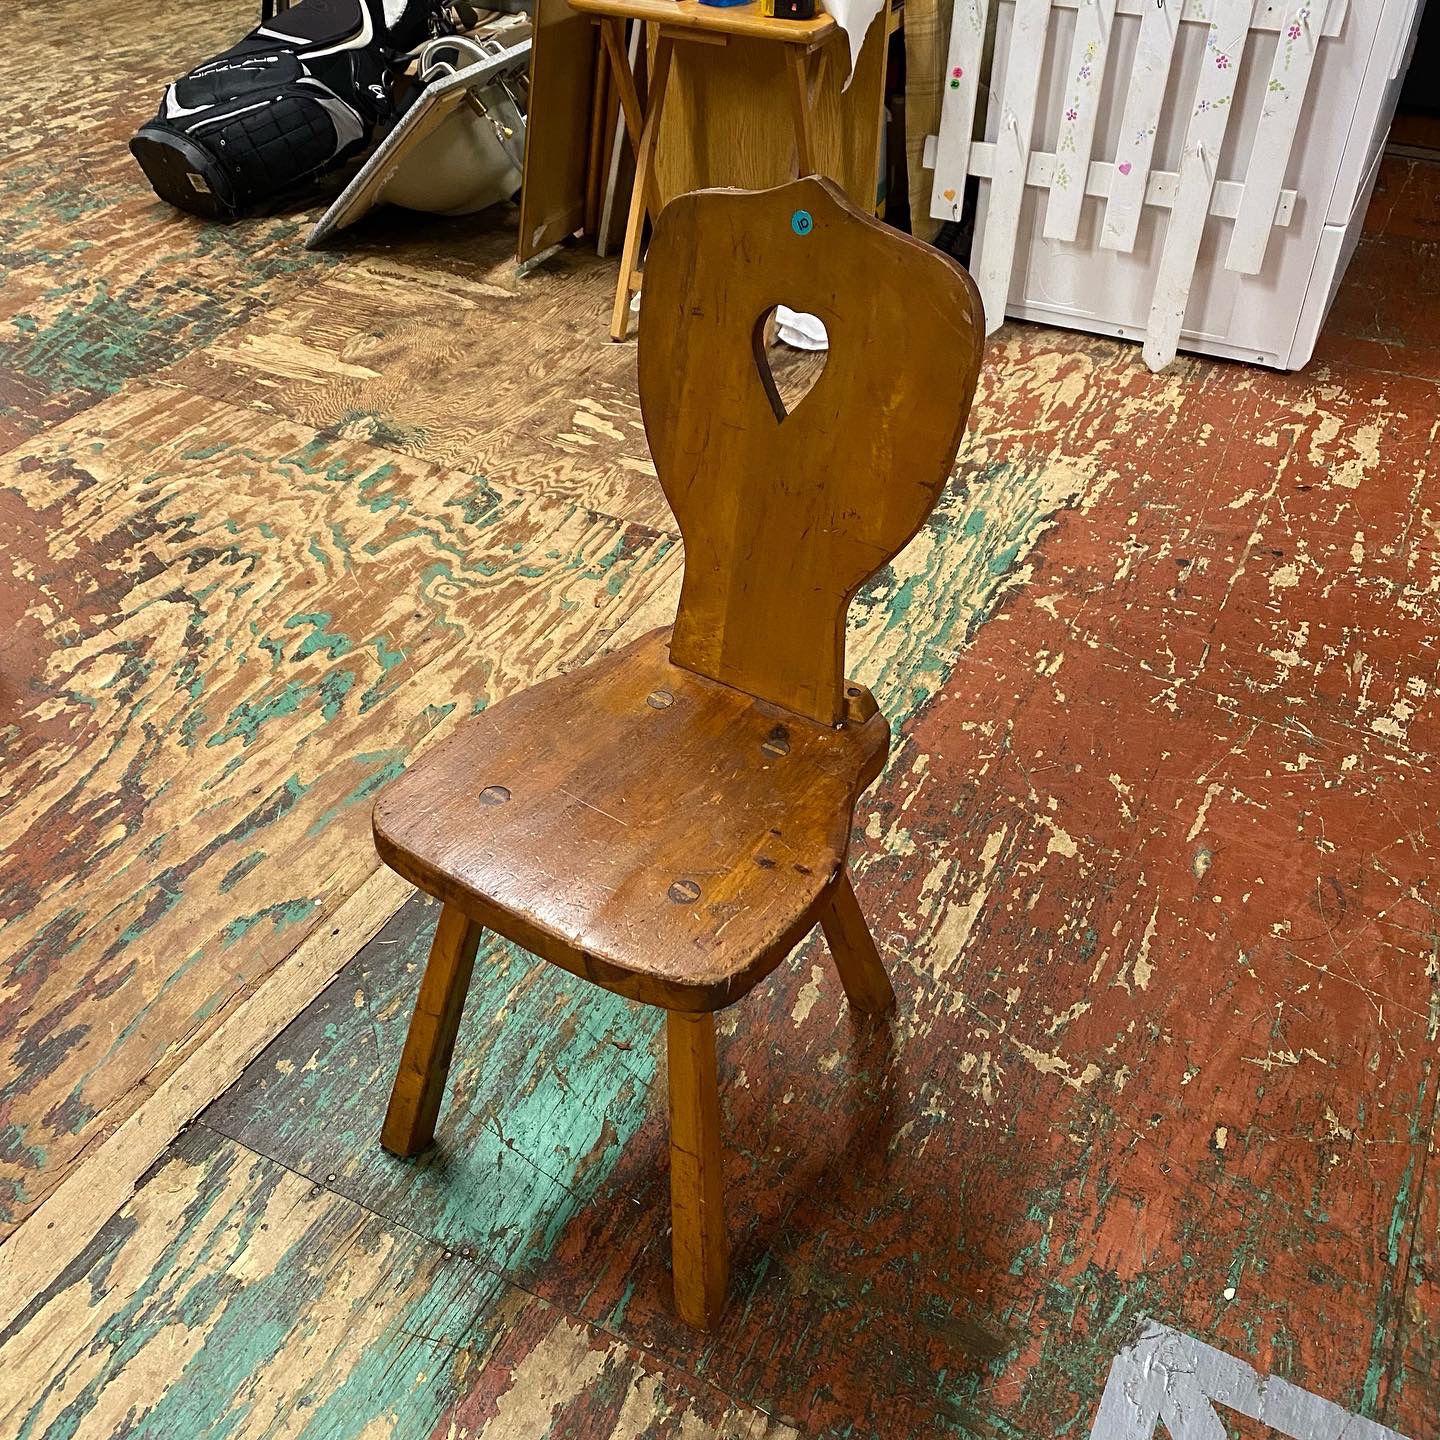 Vintage Wooden Chairs with Heart Cutout Backs. $10 each. 3 available. Buy Multiple will do $5 each